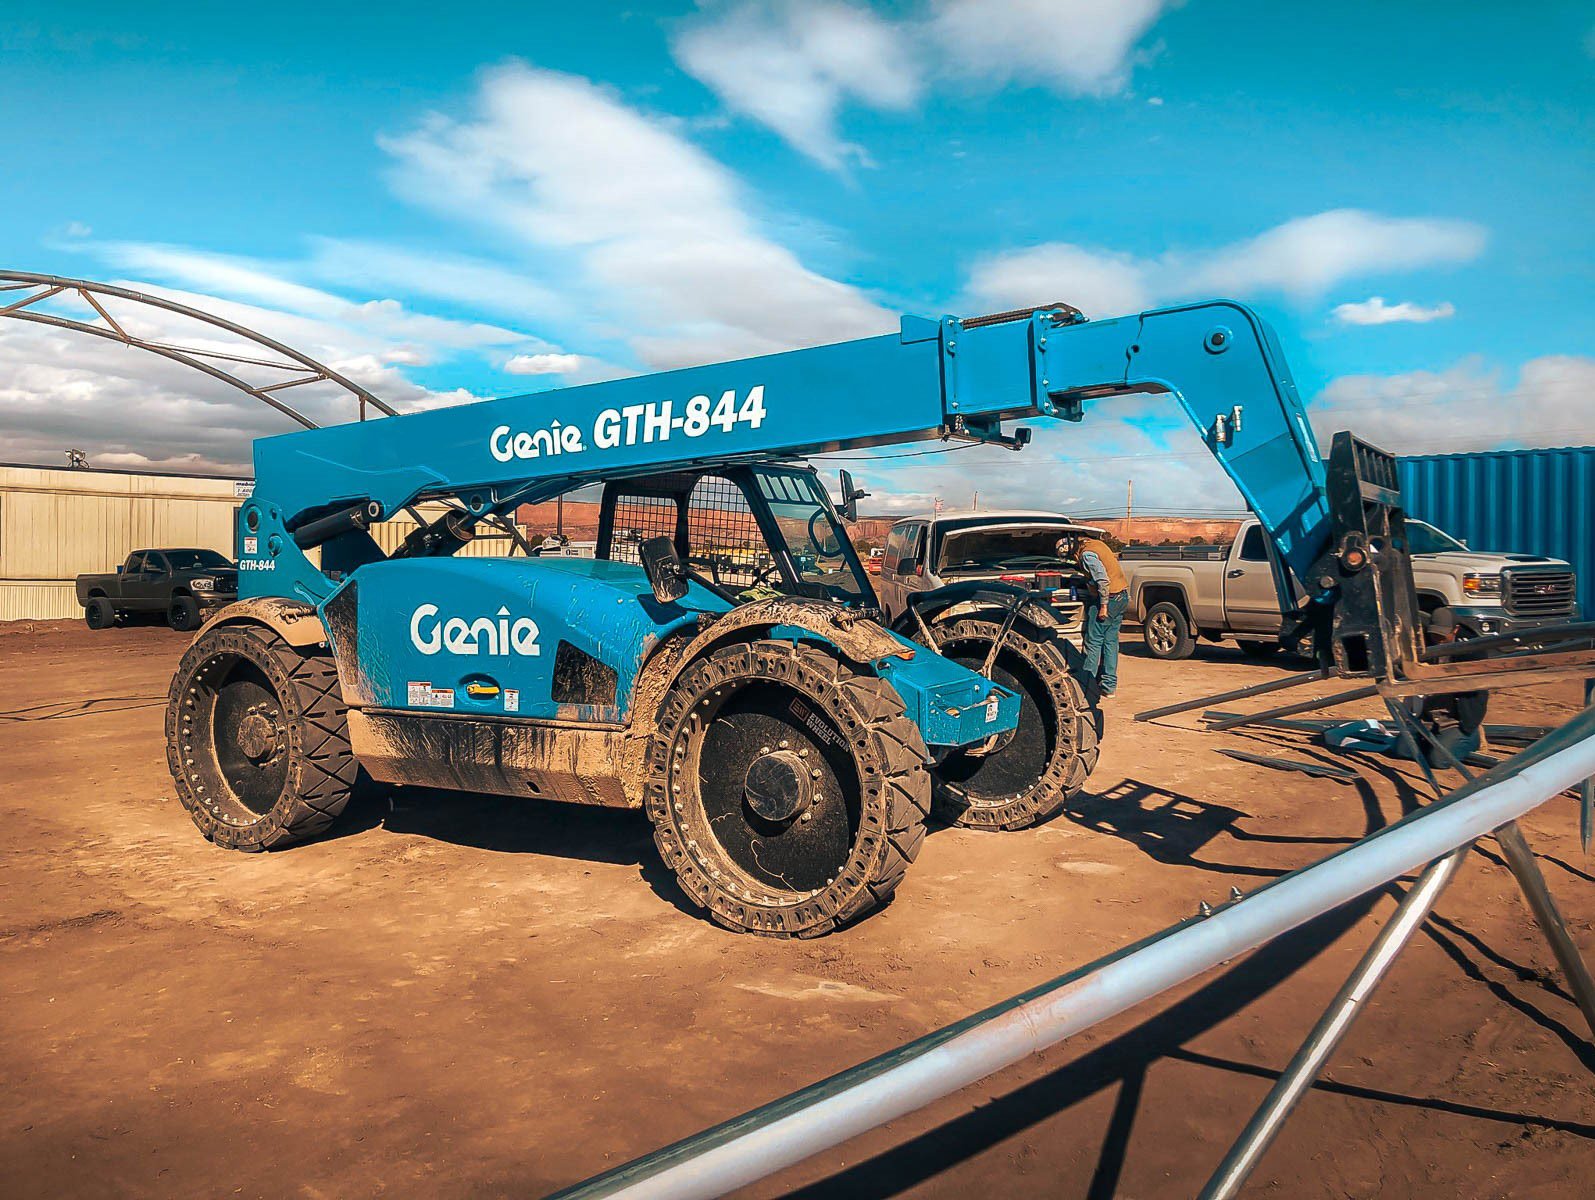 This picture shows our JLG telehandler tires on a blue Genie telehandler